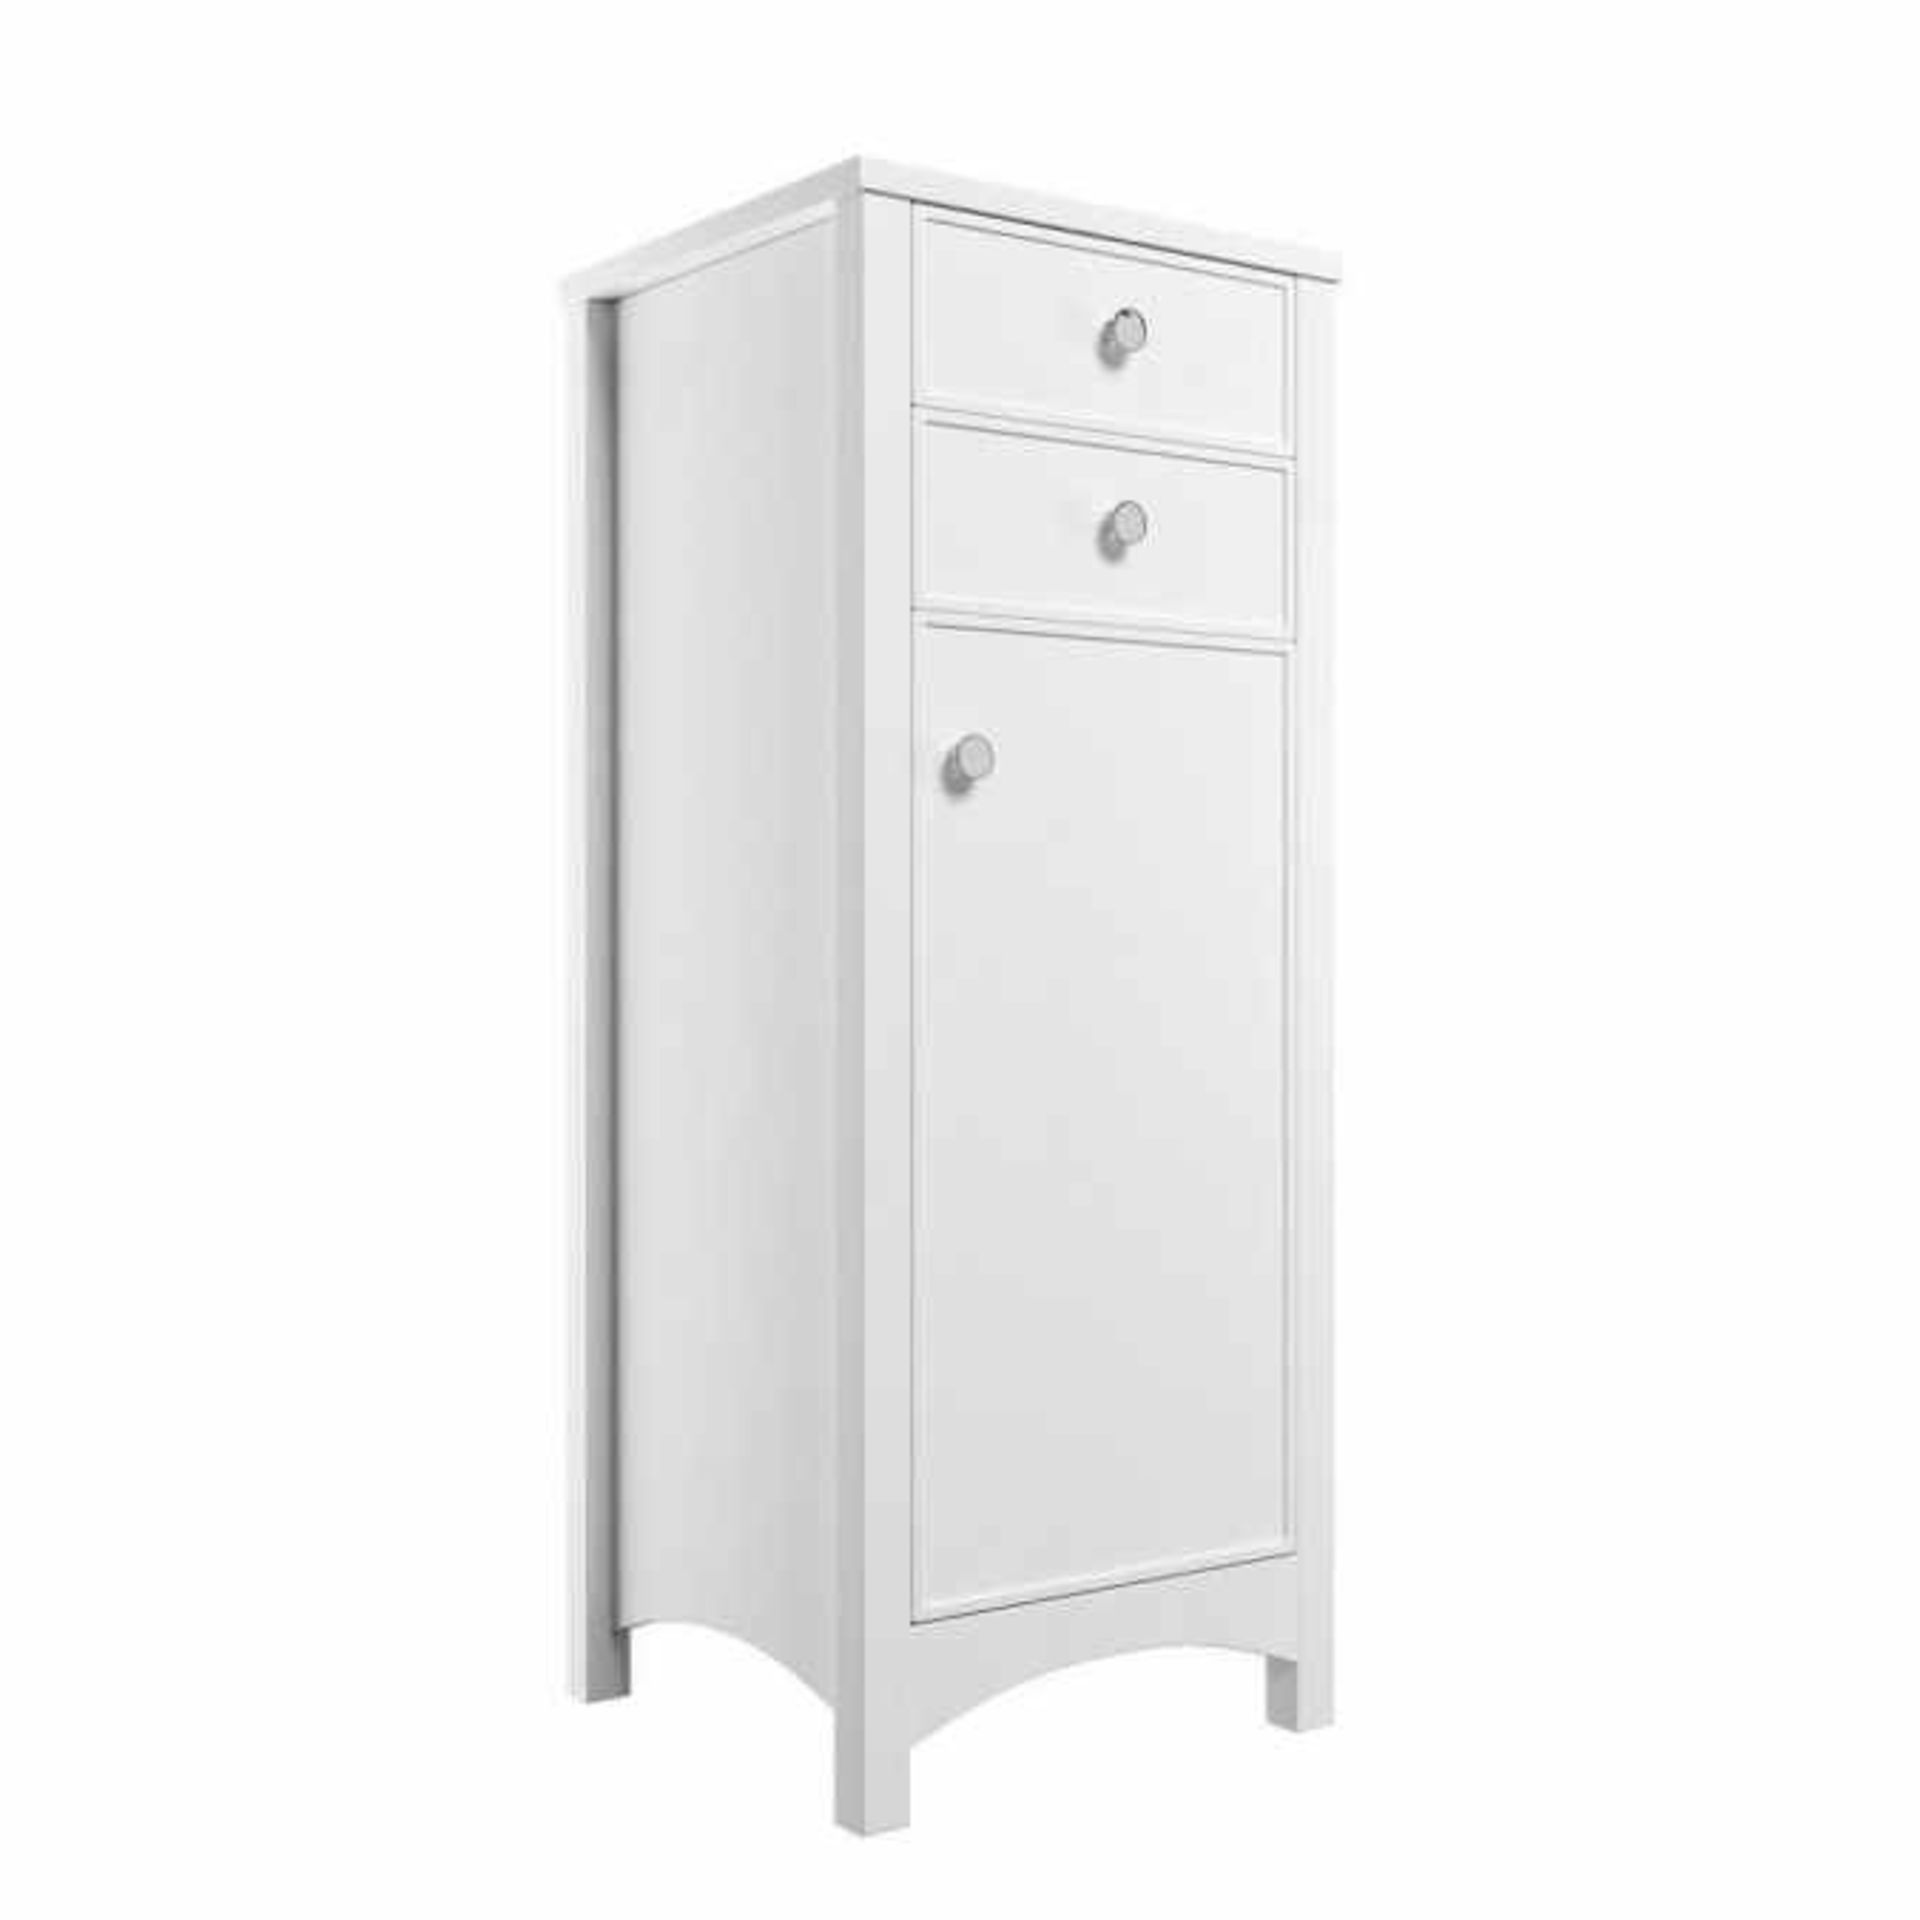 New (Y107) Lucia 465mm Tall Boy Unit In Satin White Ash. RRP £395.00. Truly Transitional - Image 2 of 2